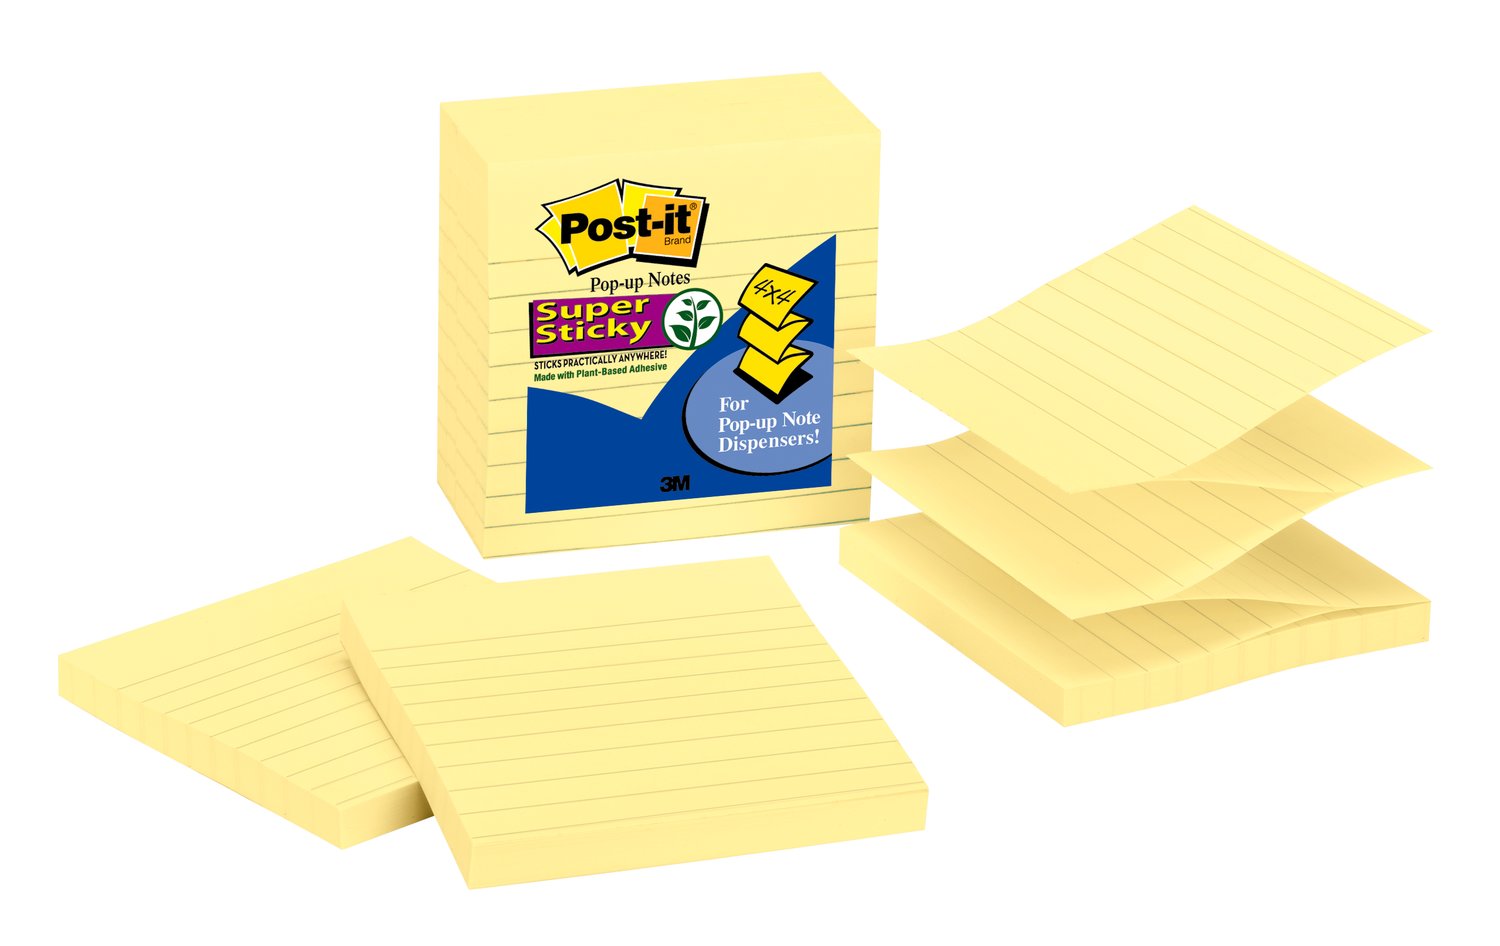 7100141279 - Post-it Super Sticky Dispenser Pop-up Notes R440-YWSS, 4 in x 4 in (101 mm x 101 mm), Canary Yellow